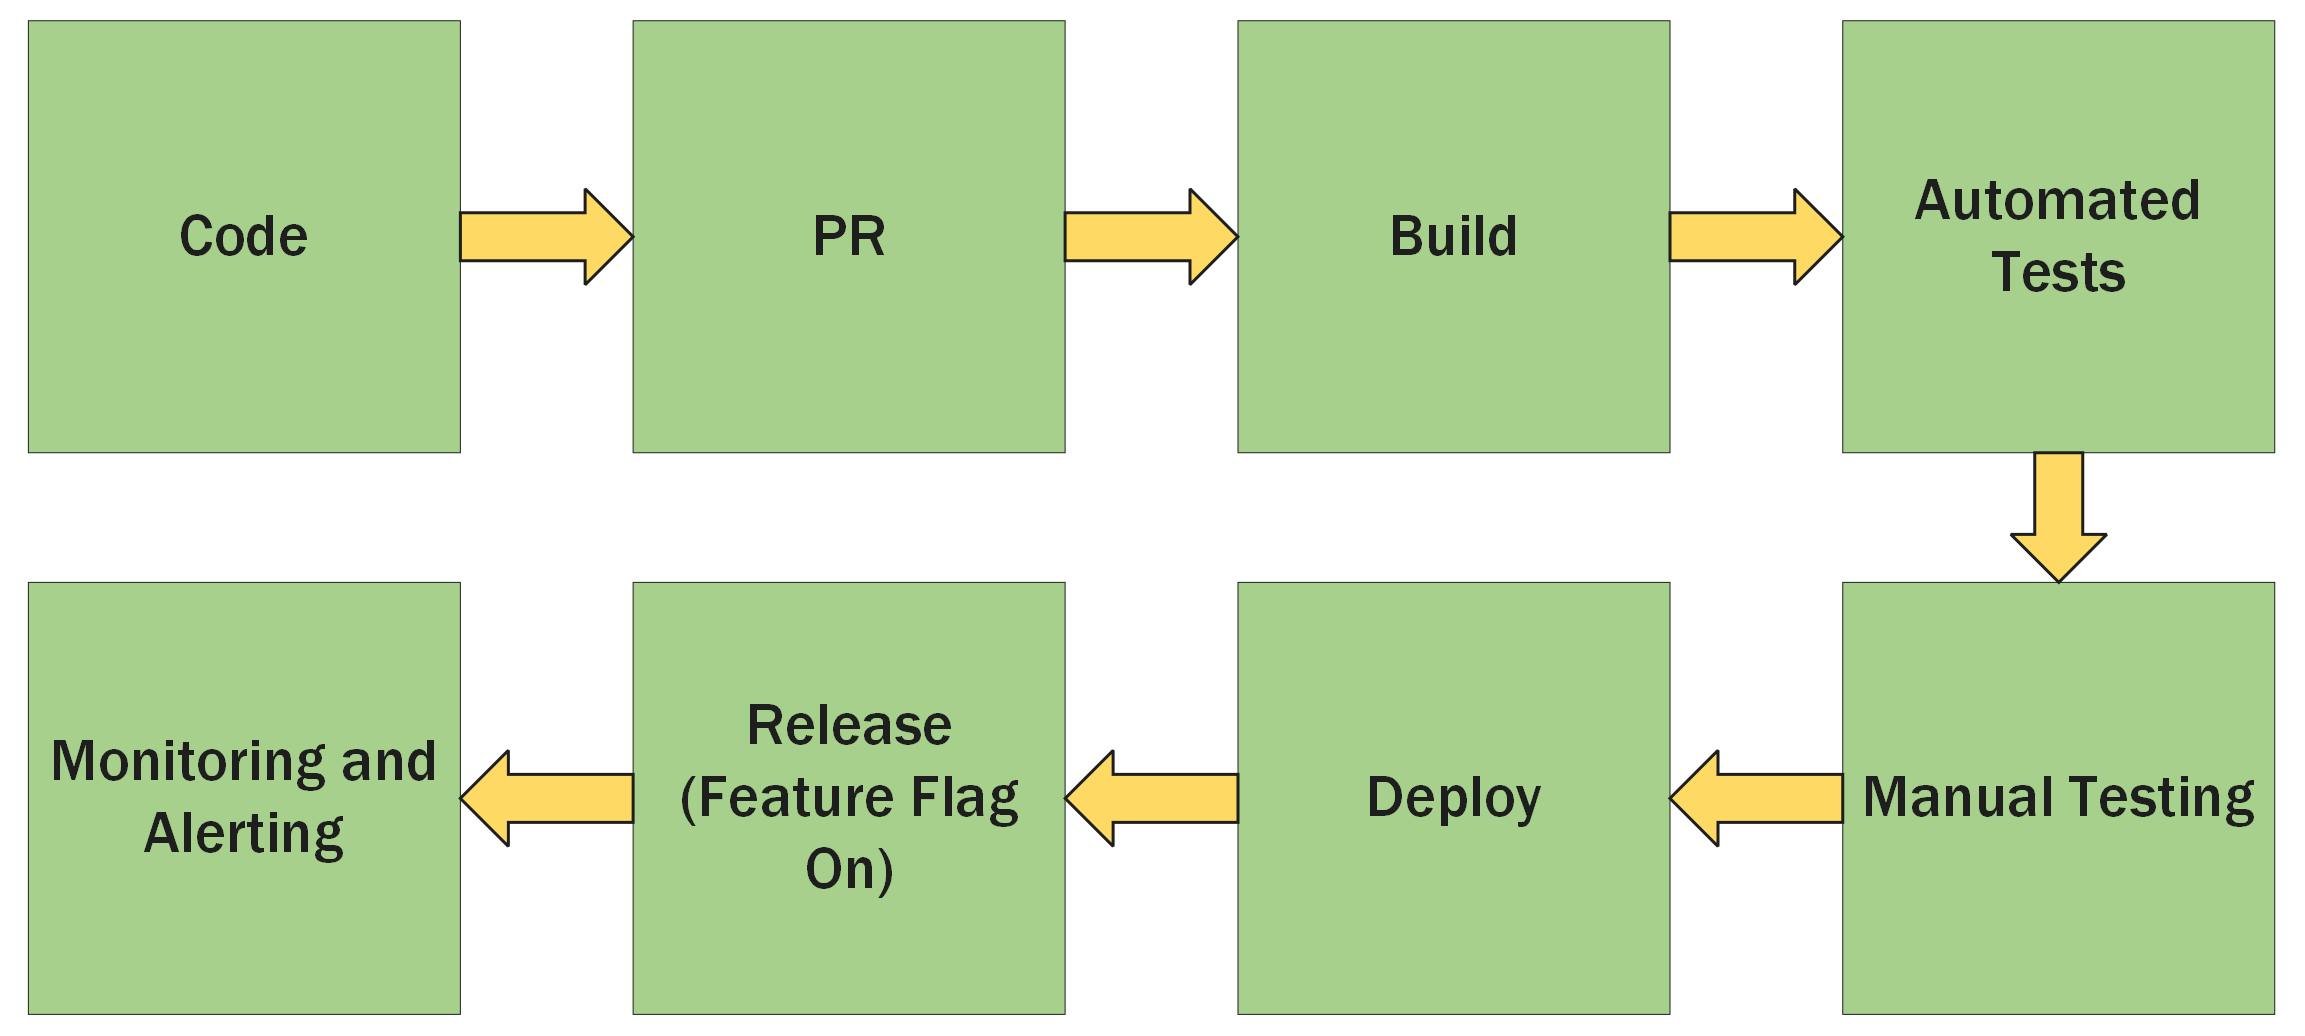 Boxes with arrows between them. In this order: Code, PR, Build, Automated Tests, Manual Testing, Deploy, Release (Feature Flag On), Monitoring and Alerting